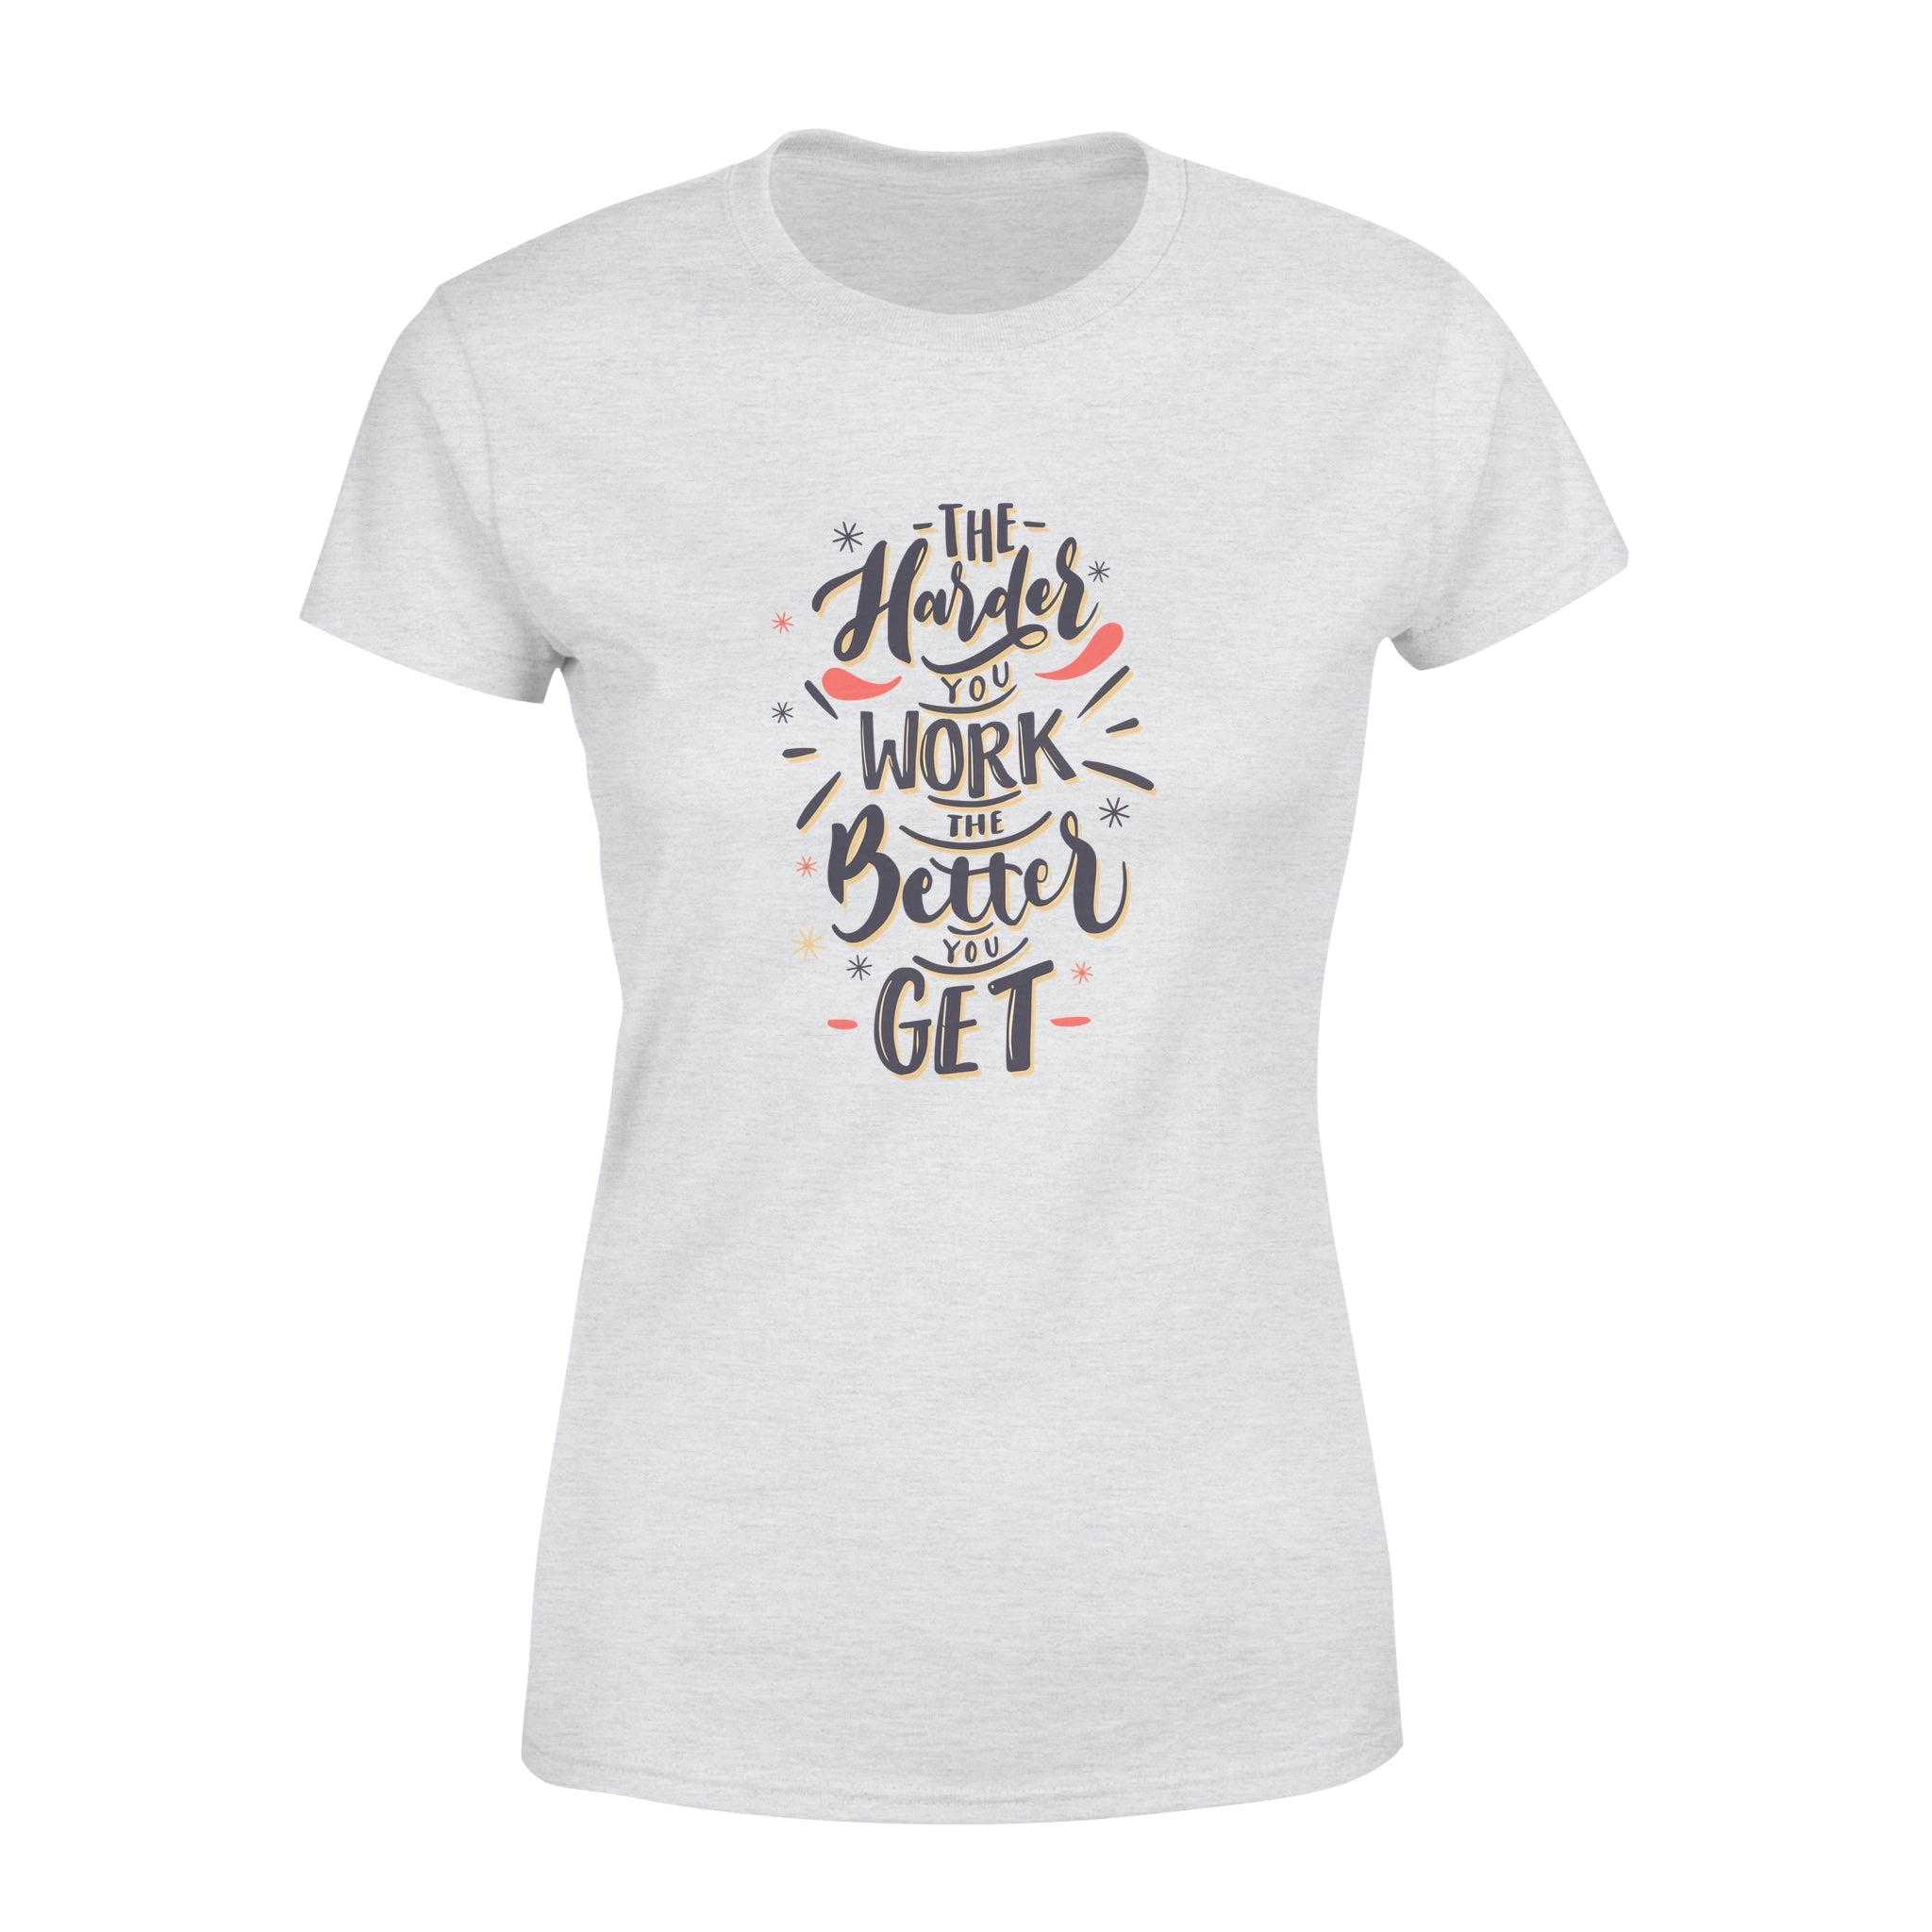 The Harder You Work The Better You Get - Women's T-shirt